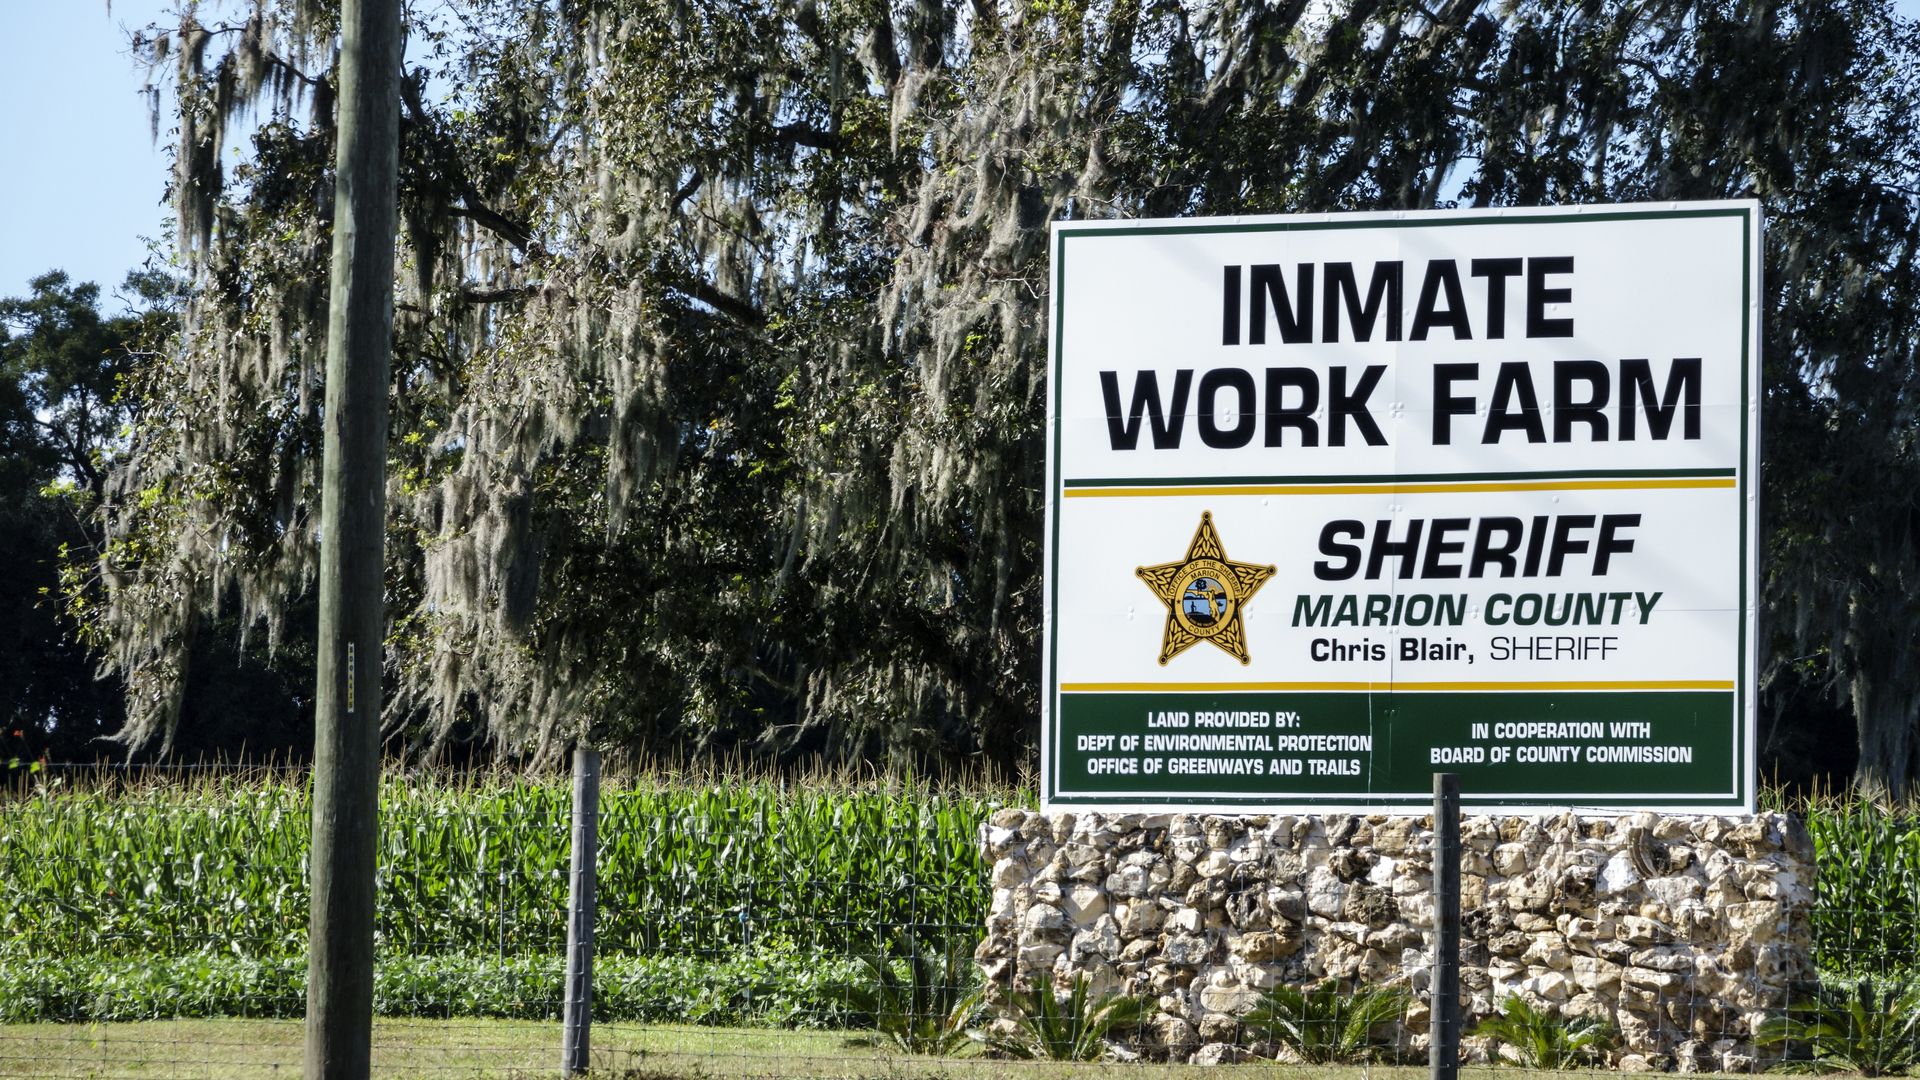 An inmate work farm in Marion County.